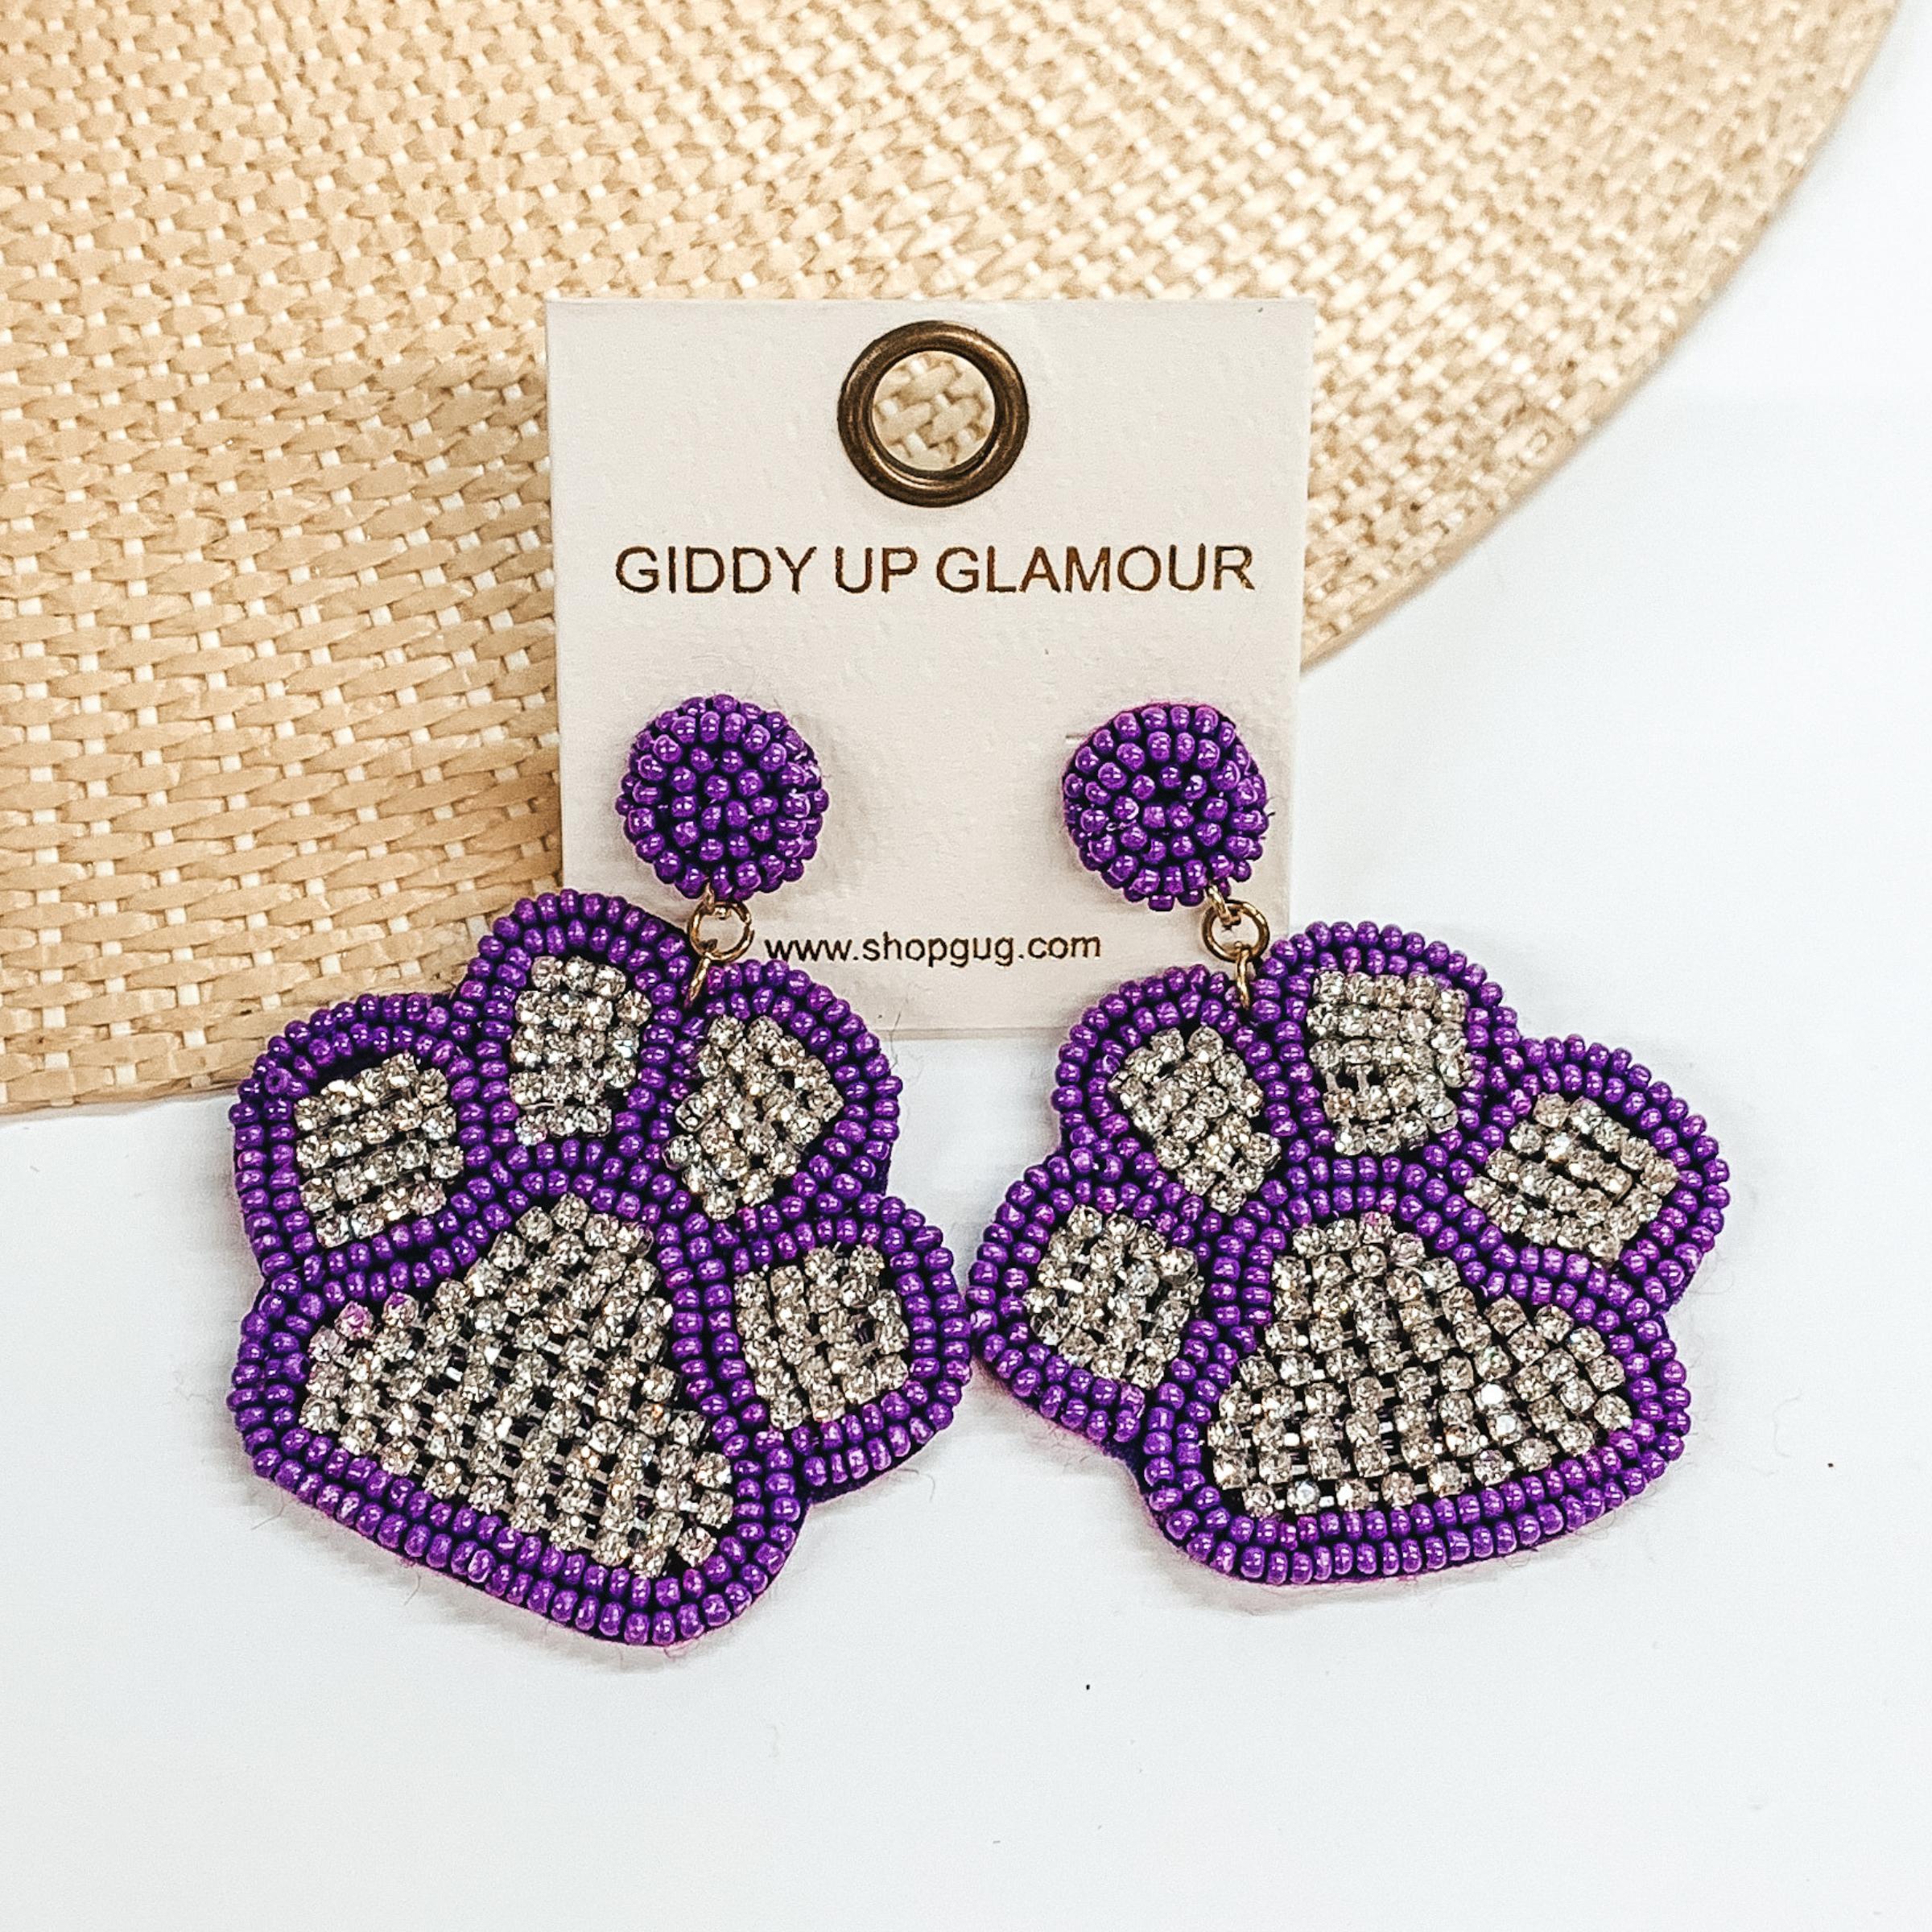 Pictured are a pair of beaded post back earrings with paw print pendants. These earrings include purple beads and clear crystals in the center. These earrings are pictured laying on a straw hat brim on a white background.